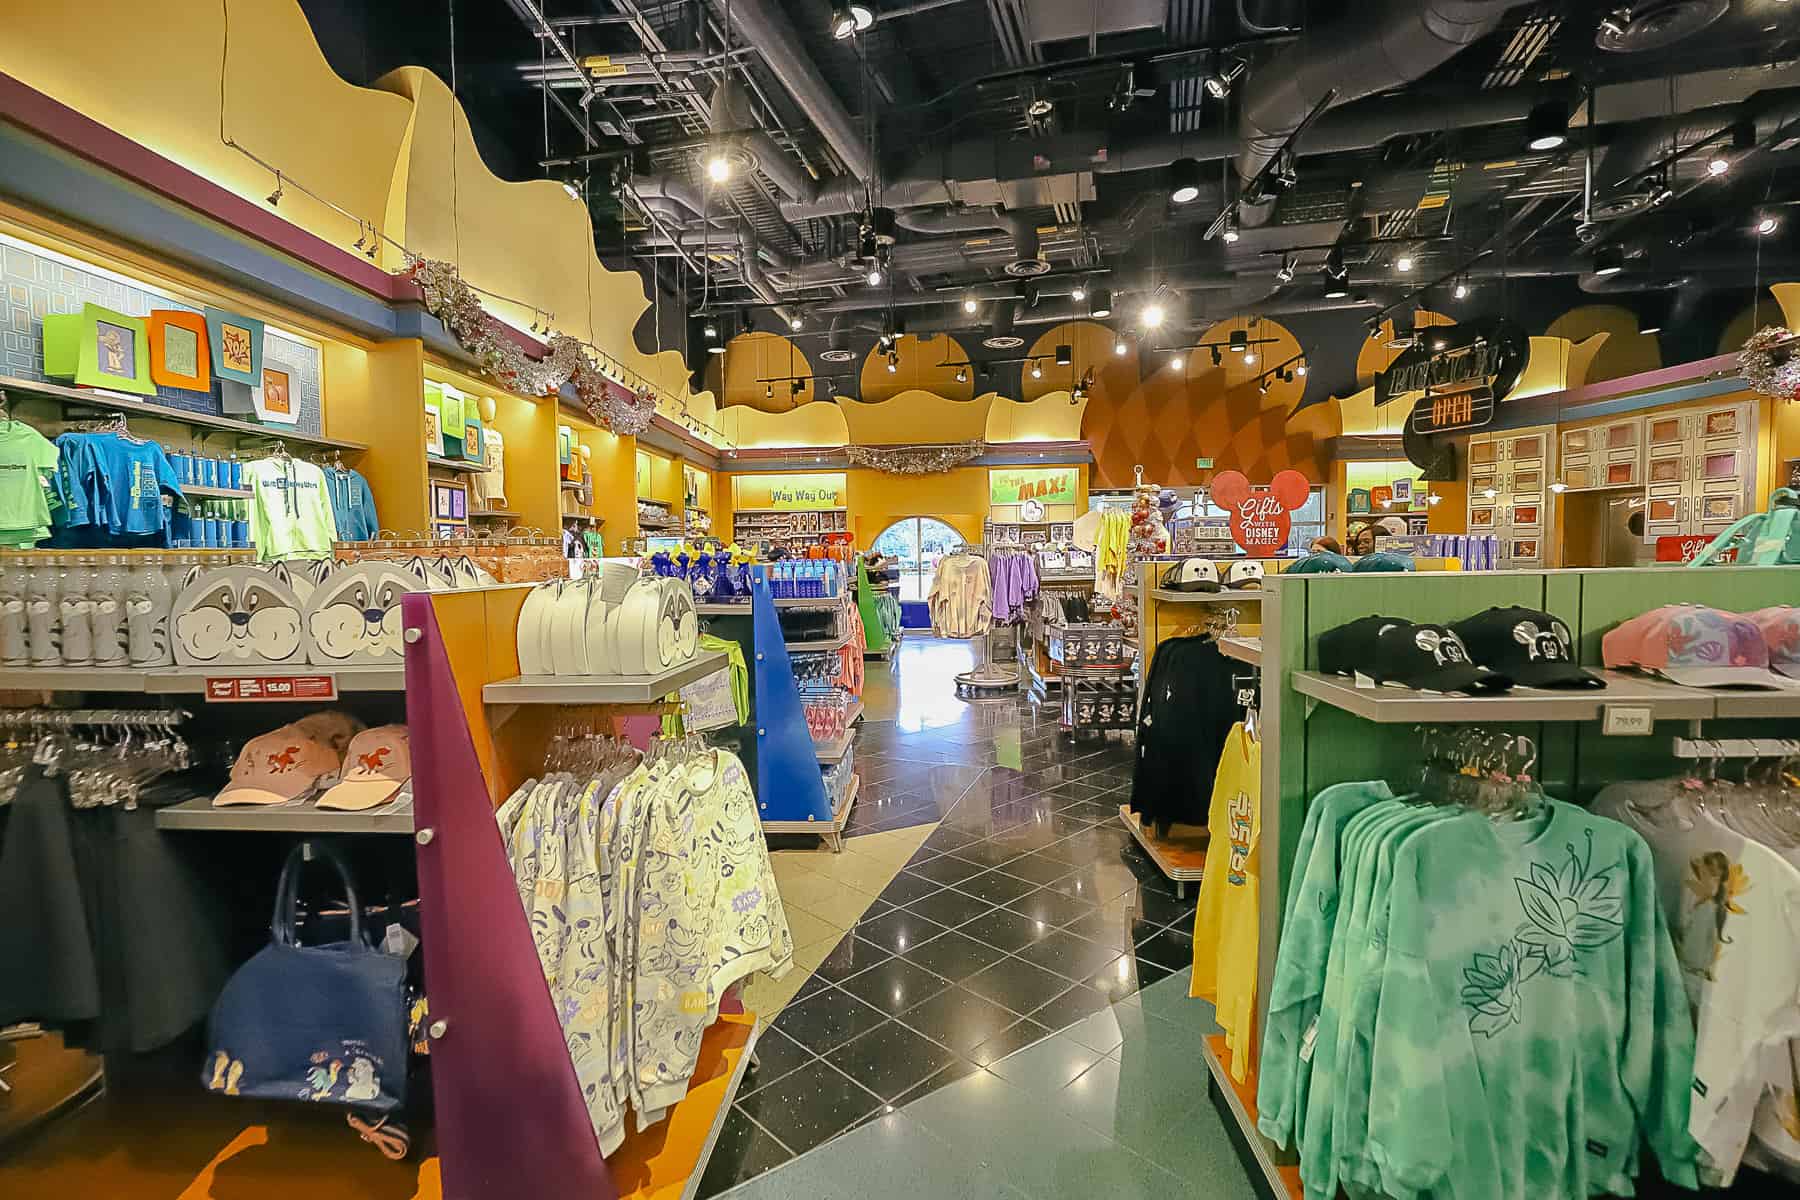 shows the layout of the gift shop 